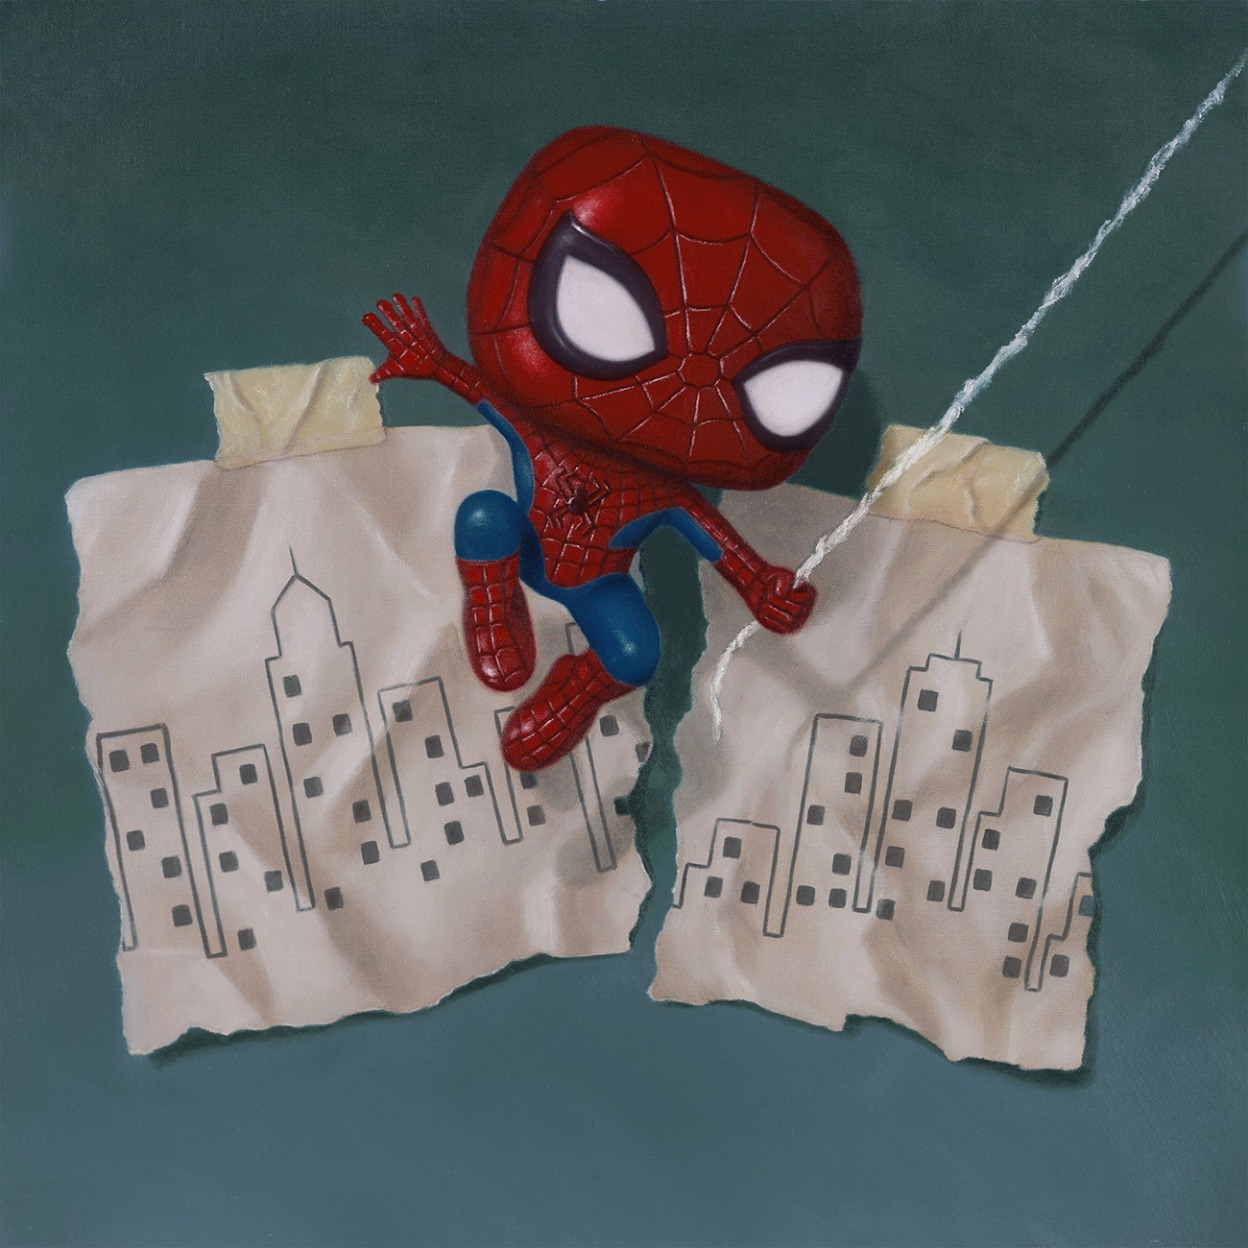 Swing into Action by Nigel Humphries, Spiderman